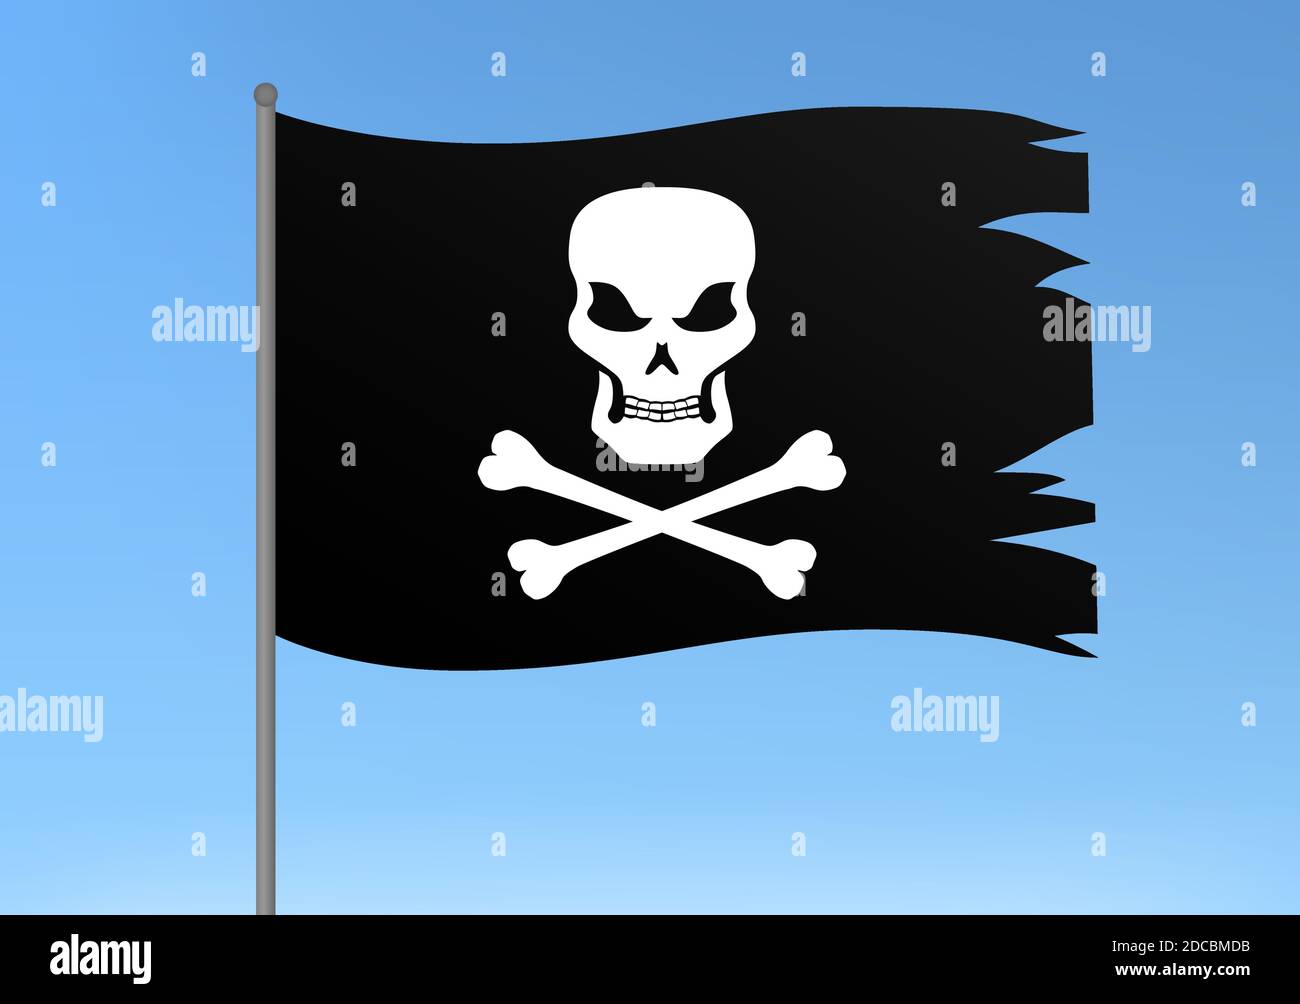 Black pirate flag with skull and bones symbol vector illustration Stock Vector